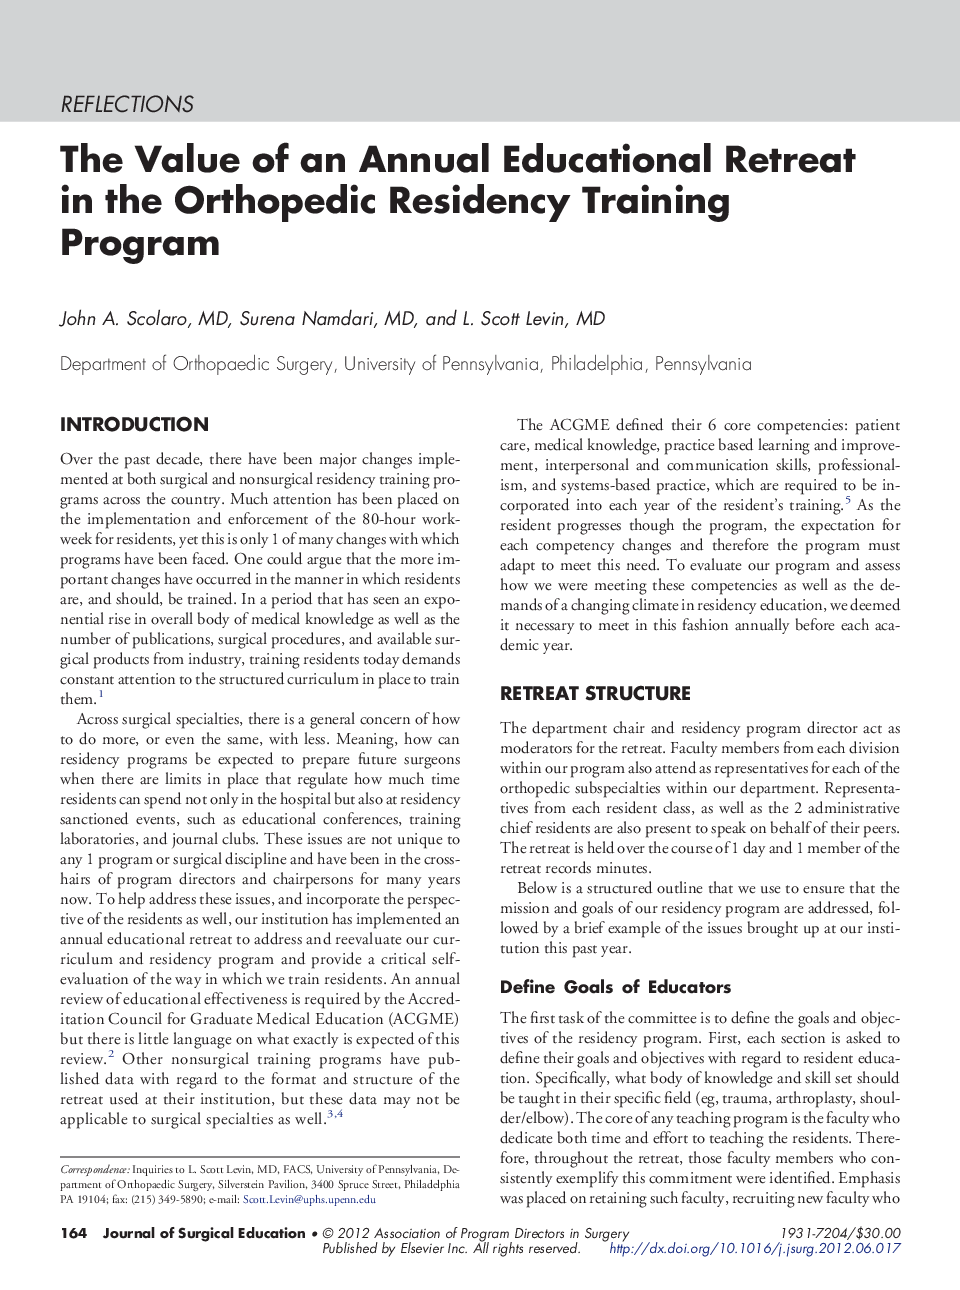 The Value of an Annual Educational Retreat in the Orthopedic Residency Training Program